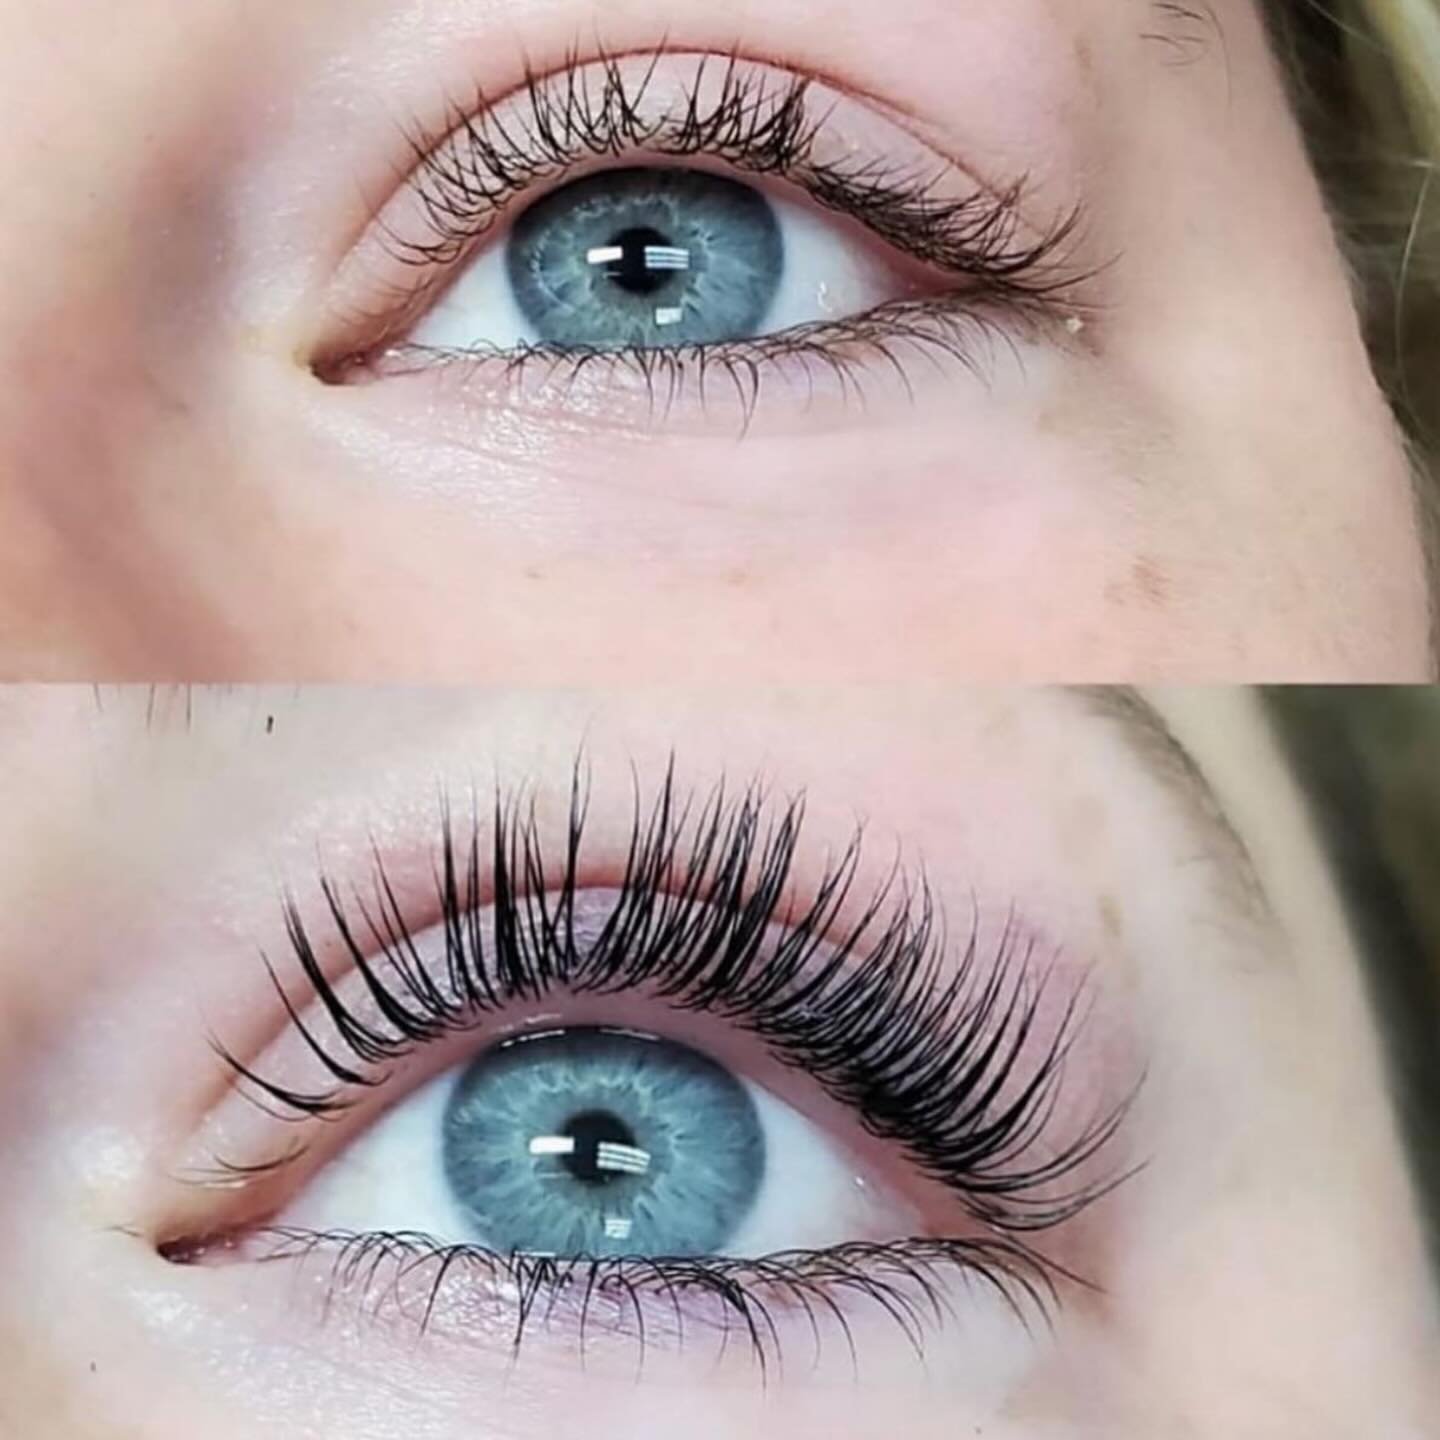 Have you booked your lash appointment yet?

Promo pricing through May 31st 💜

#skincare #esthetics #jetpeel  #hvwesthetics #northofboston 
#marbleheadma #northshore #marbleheadmass #spf #sunscreen #hydrate #marbleheadmassachusetts #antiaging #treaty